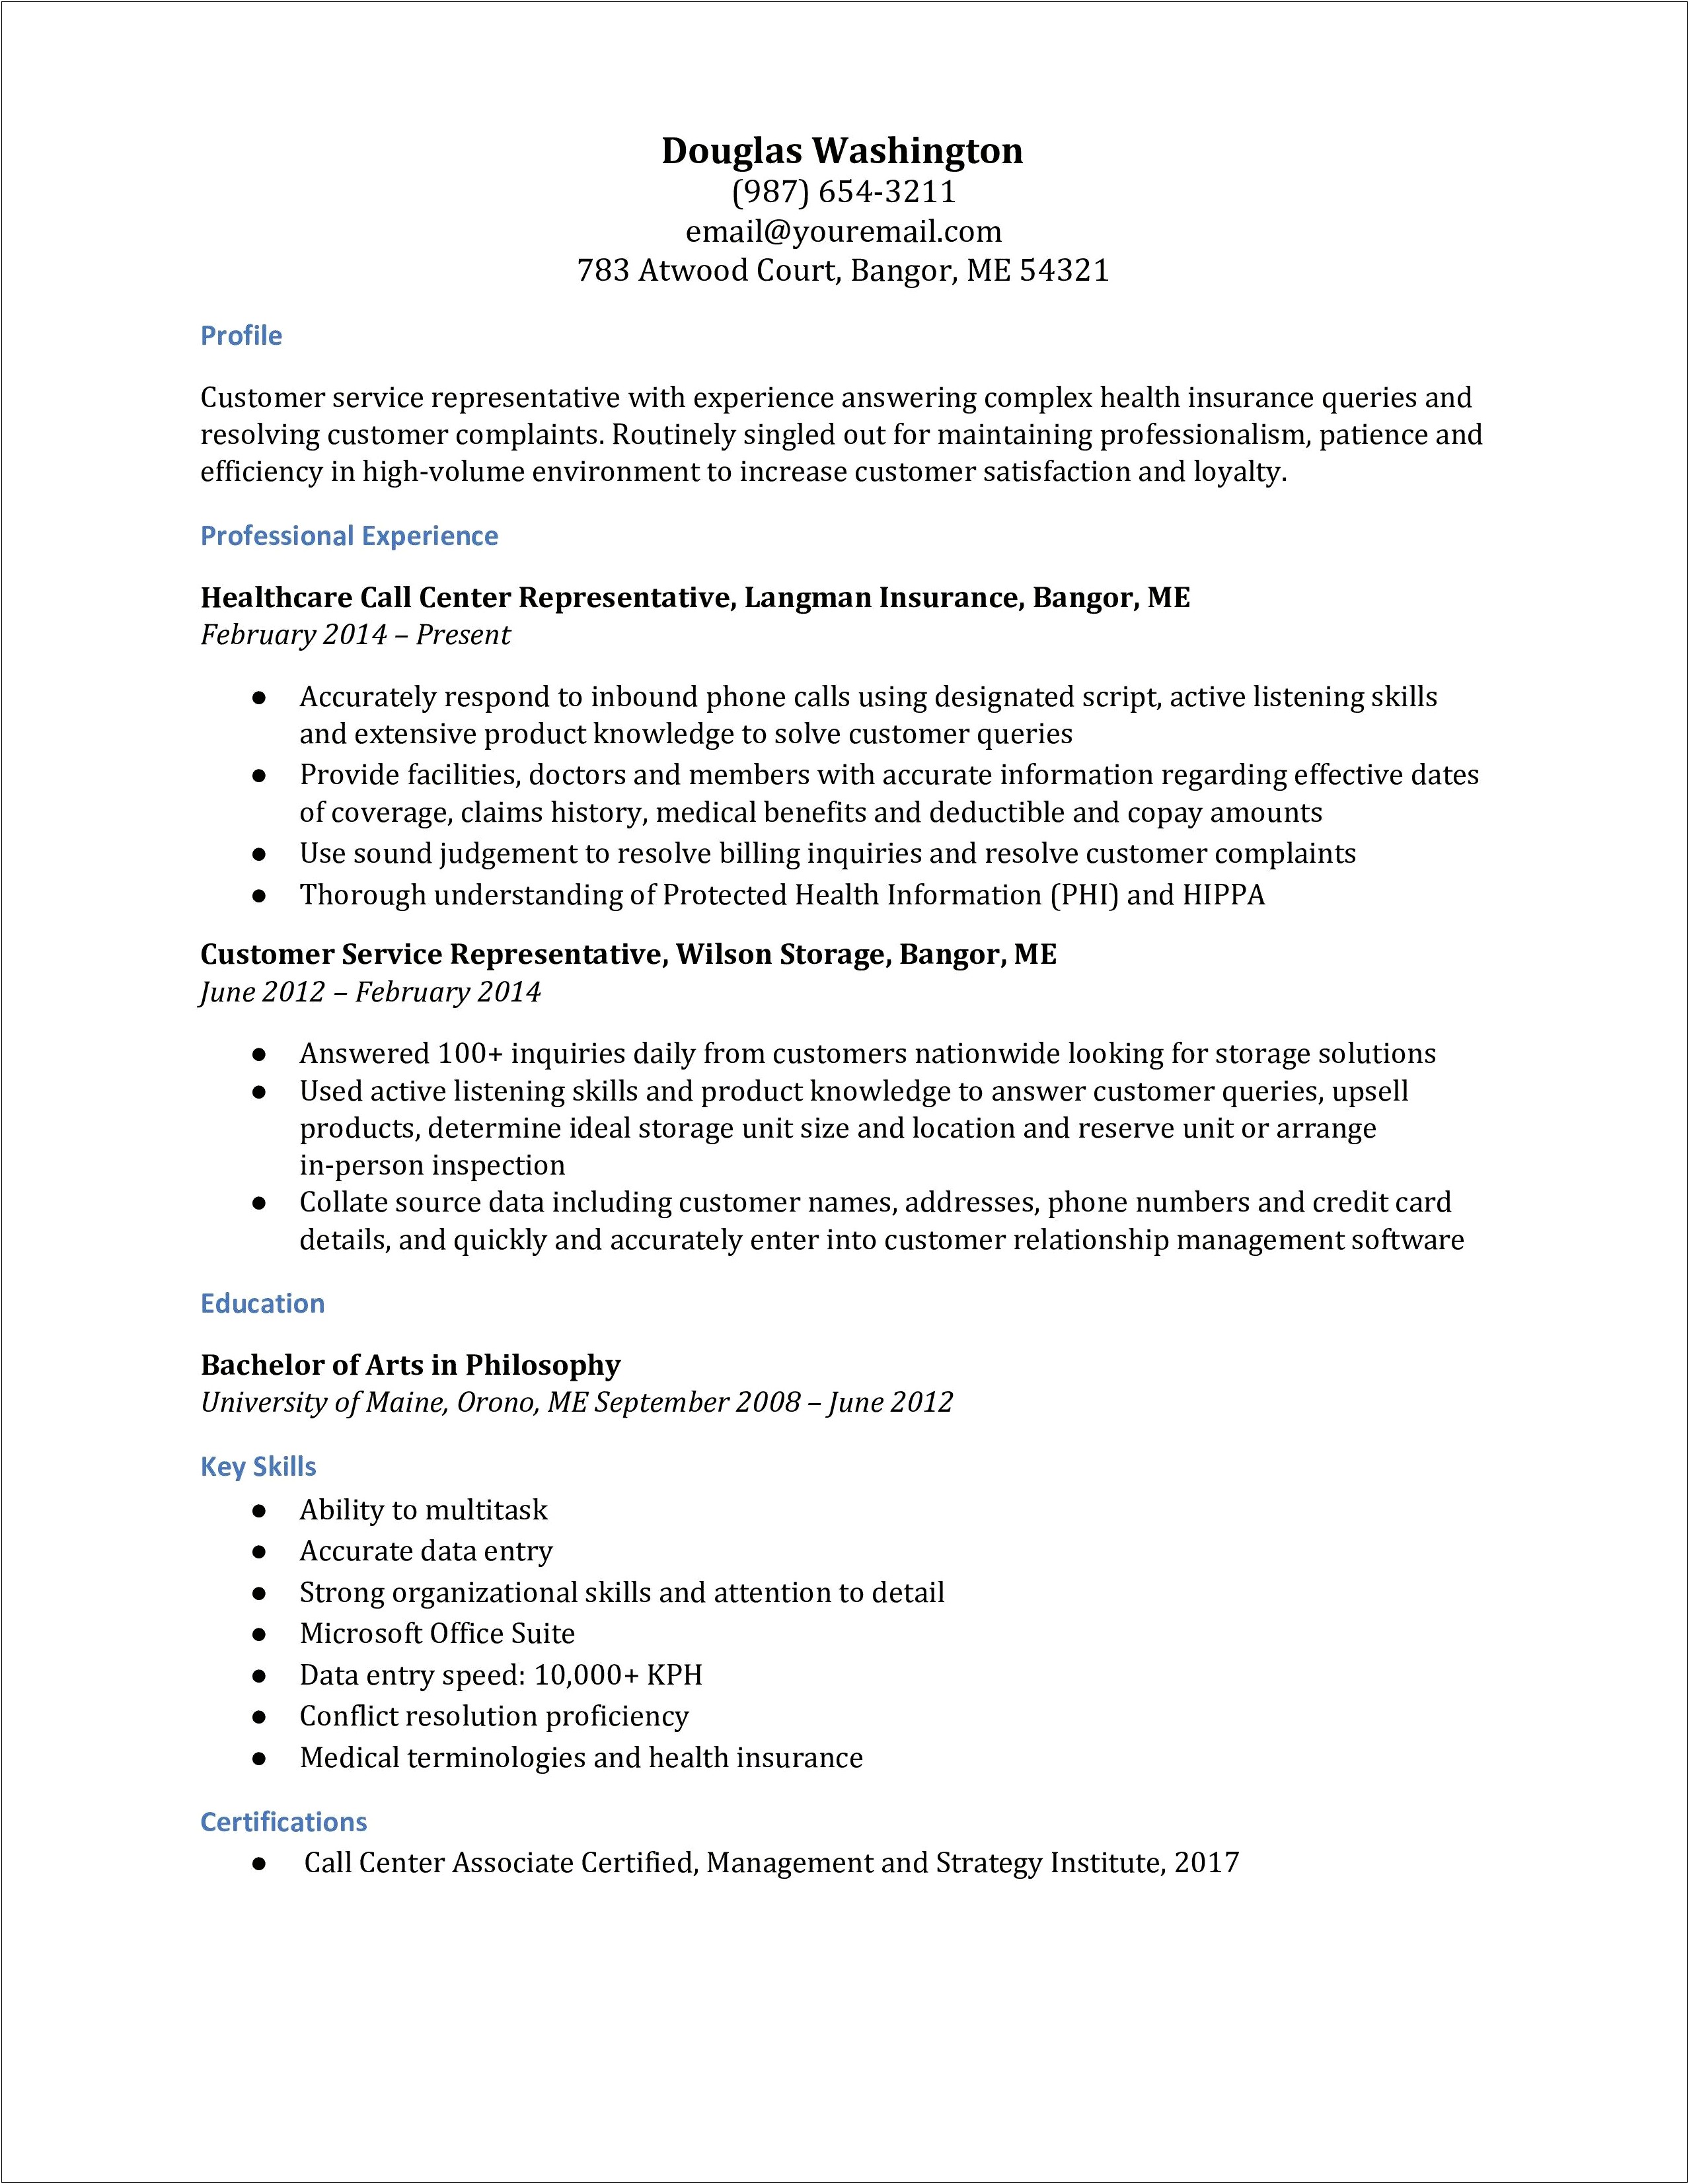 Resume Objective For Inbound Call Center